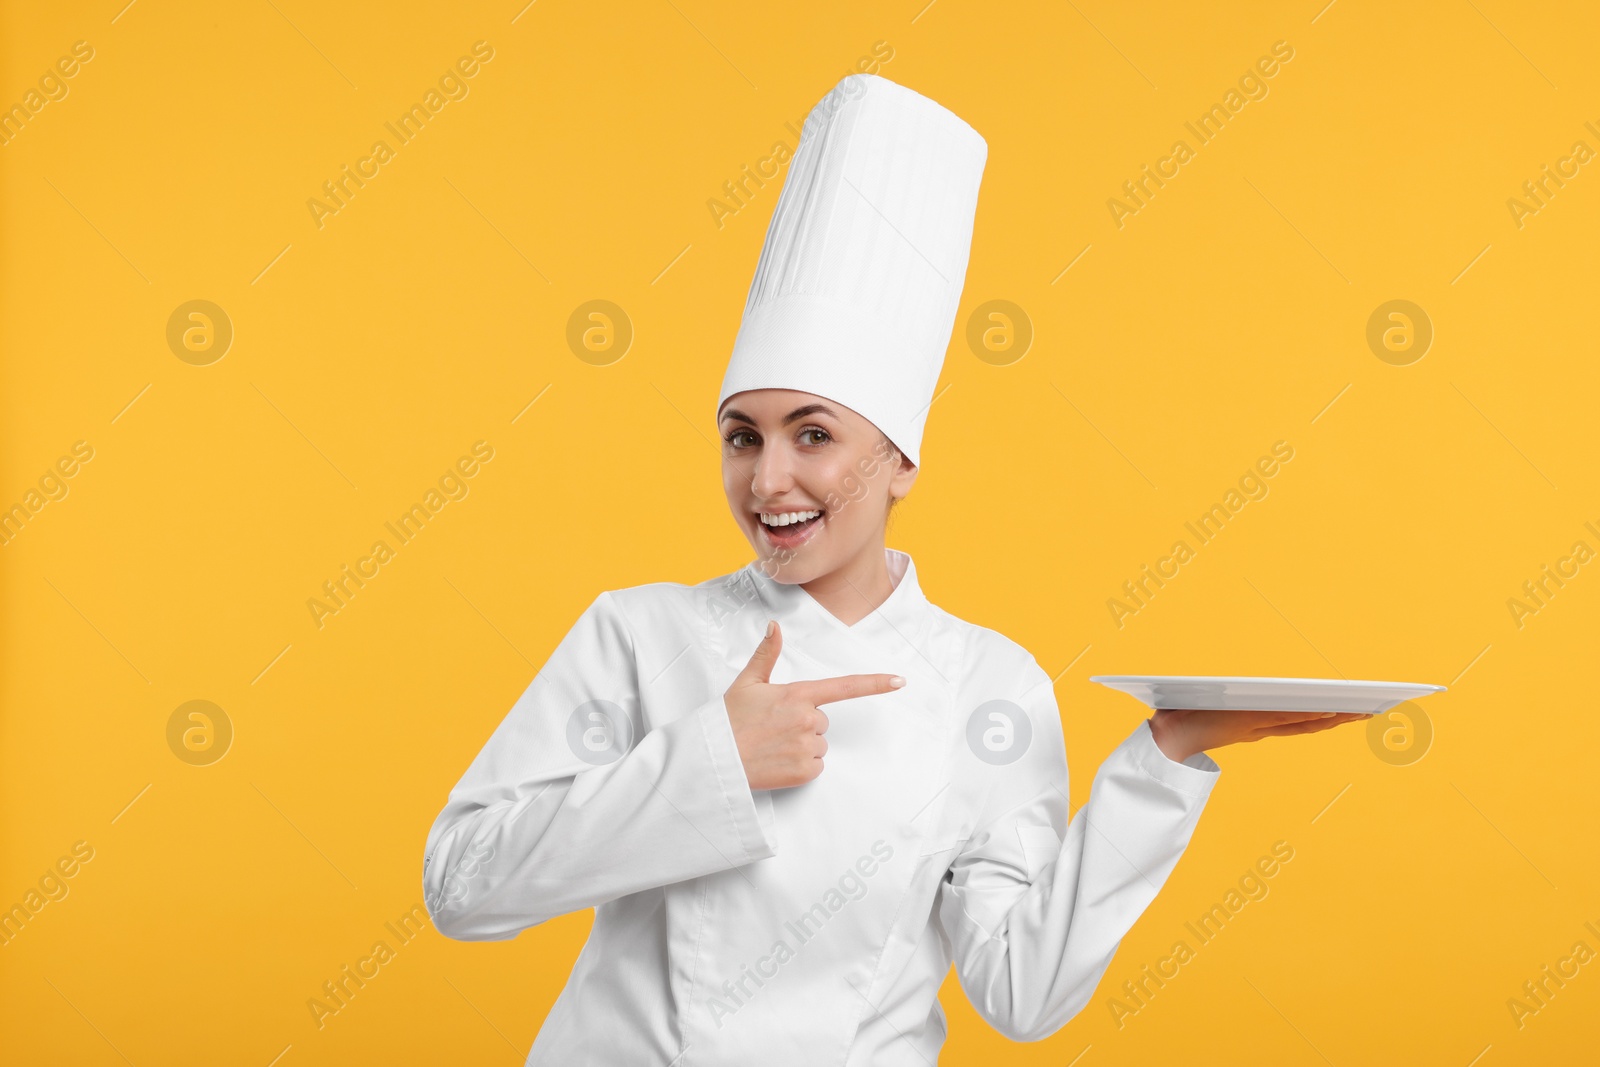 Photo of Happy professional confectioner in uniform pointing at empty plate on yellow background